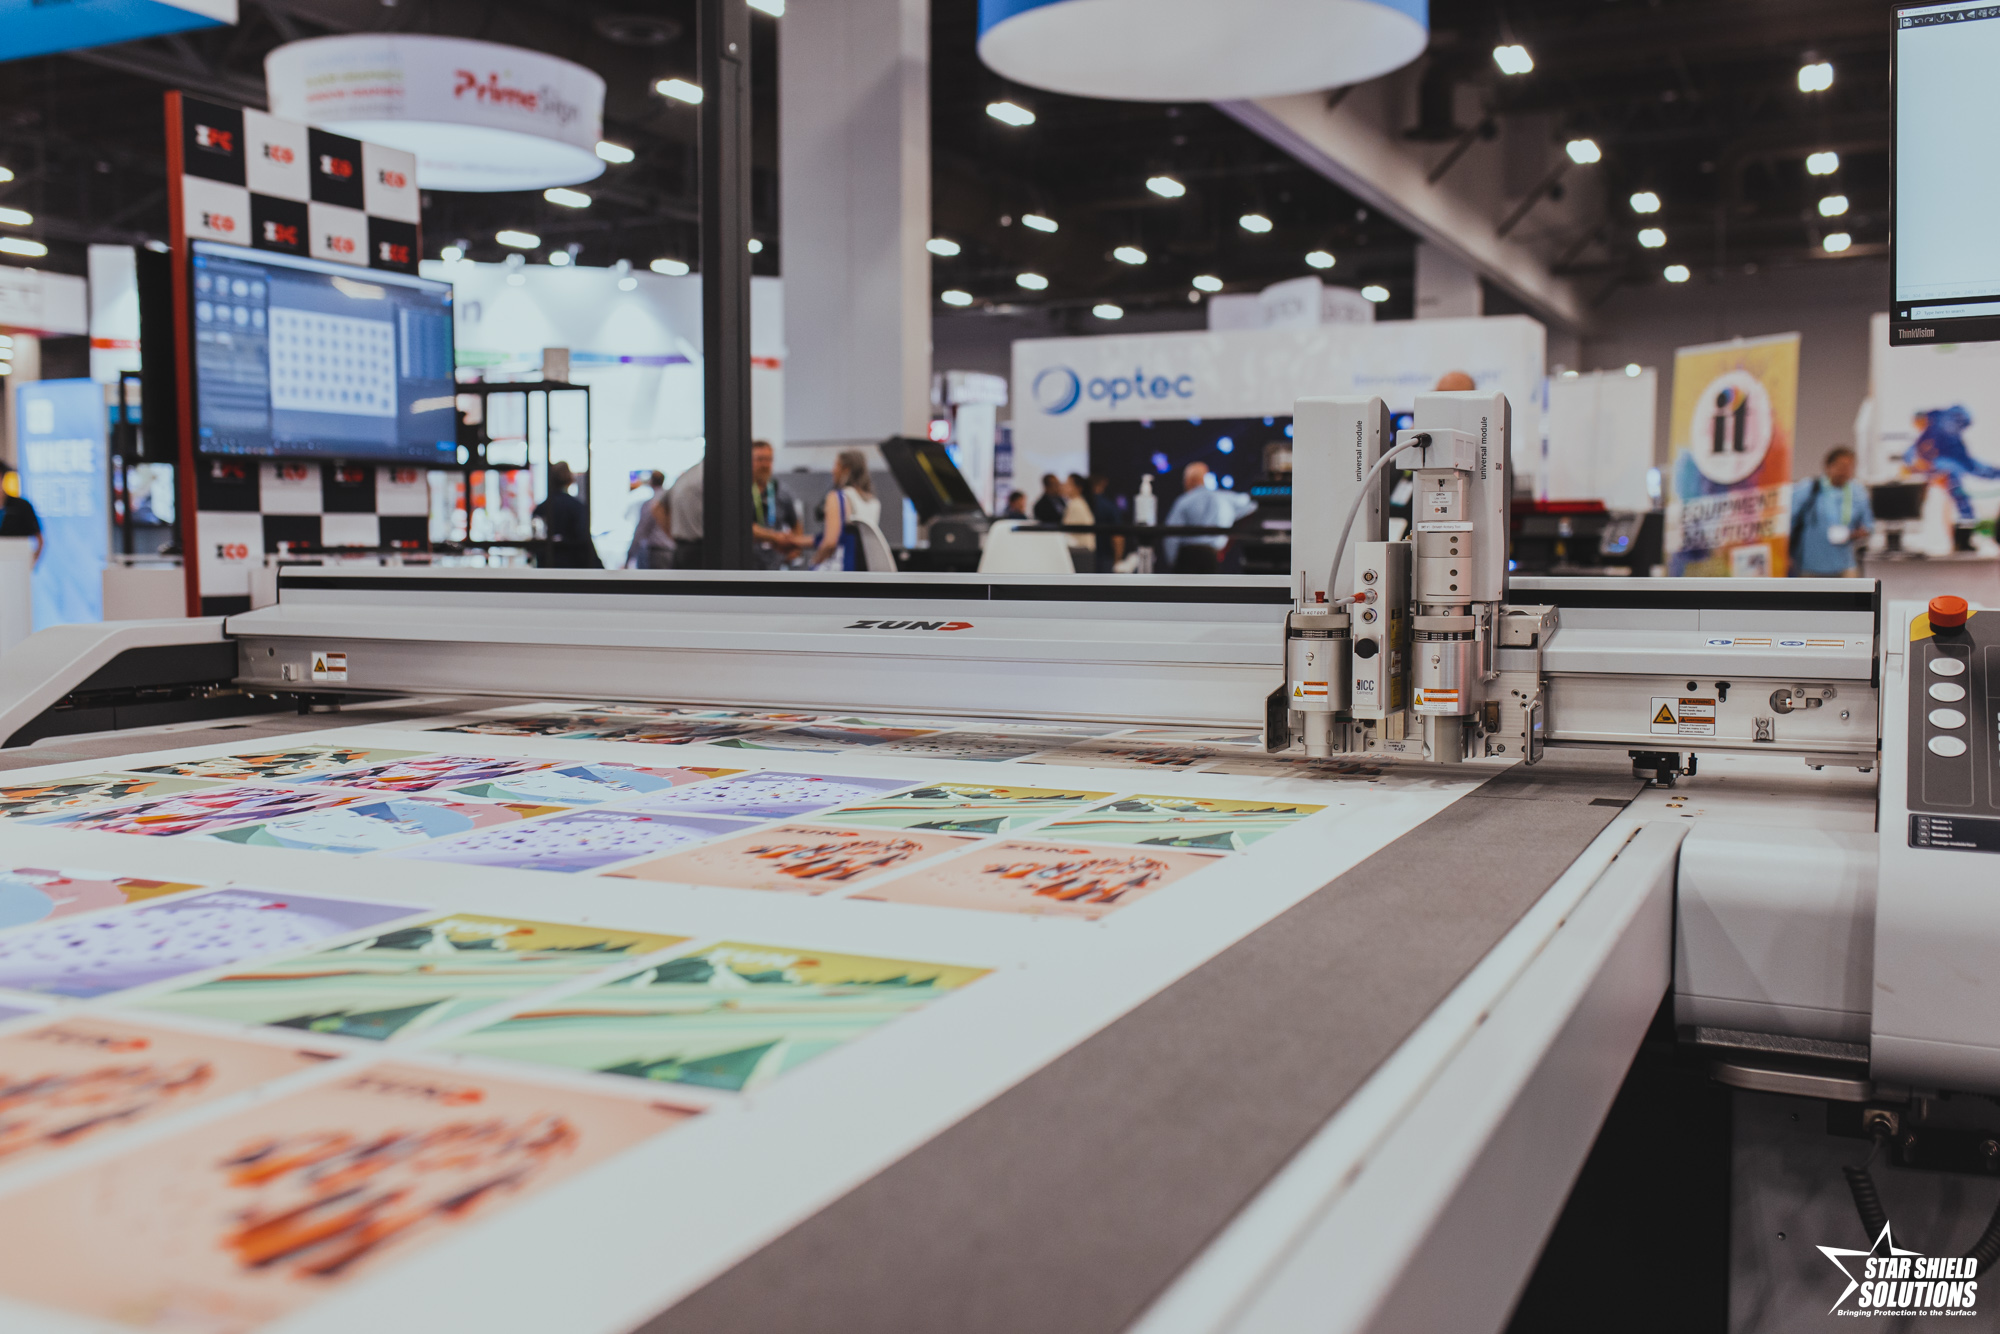 Procolored Showcased its Innovative Printers and Patent Technology at ISA  Expo